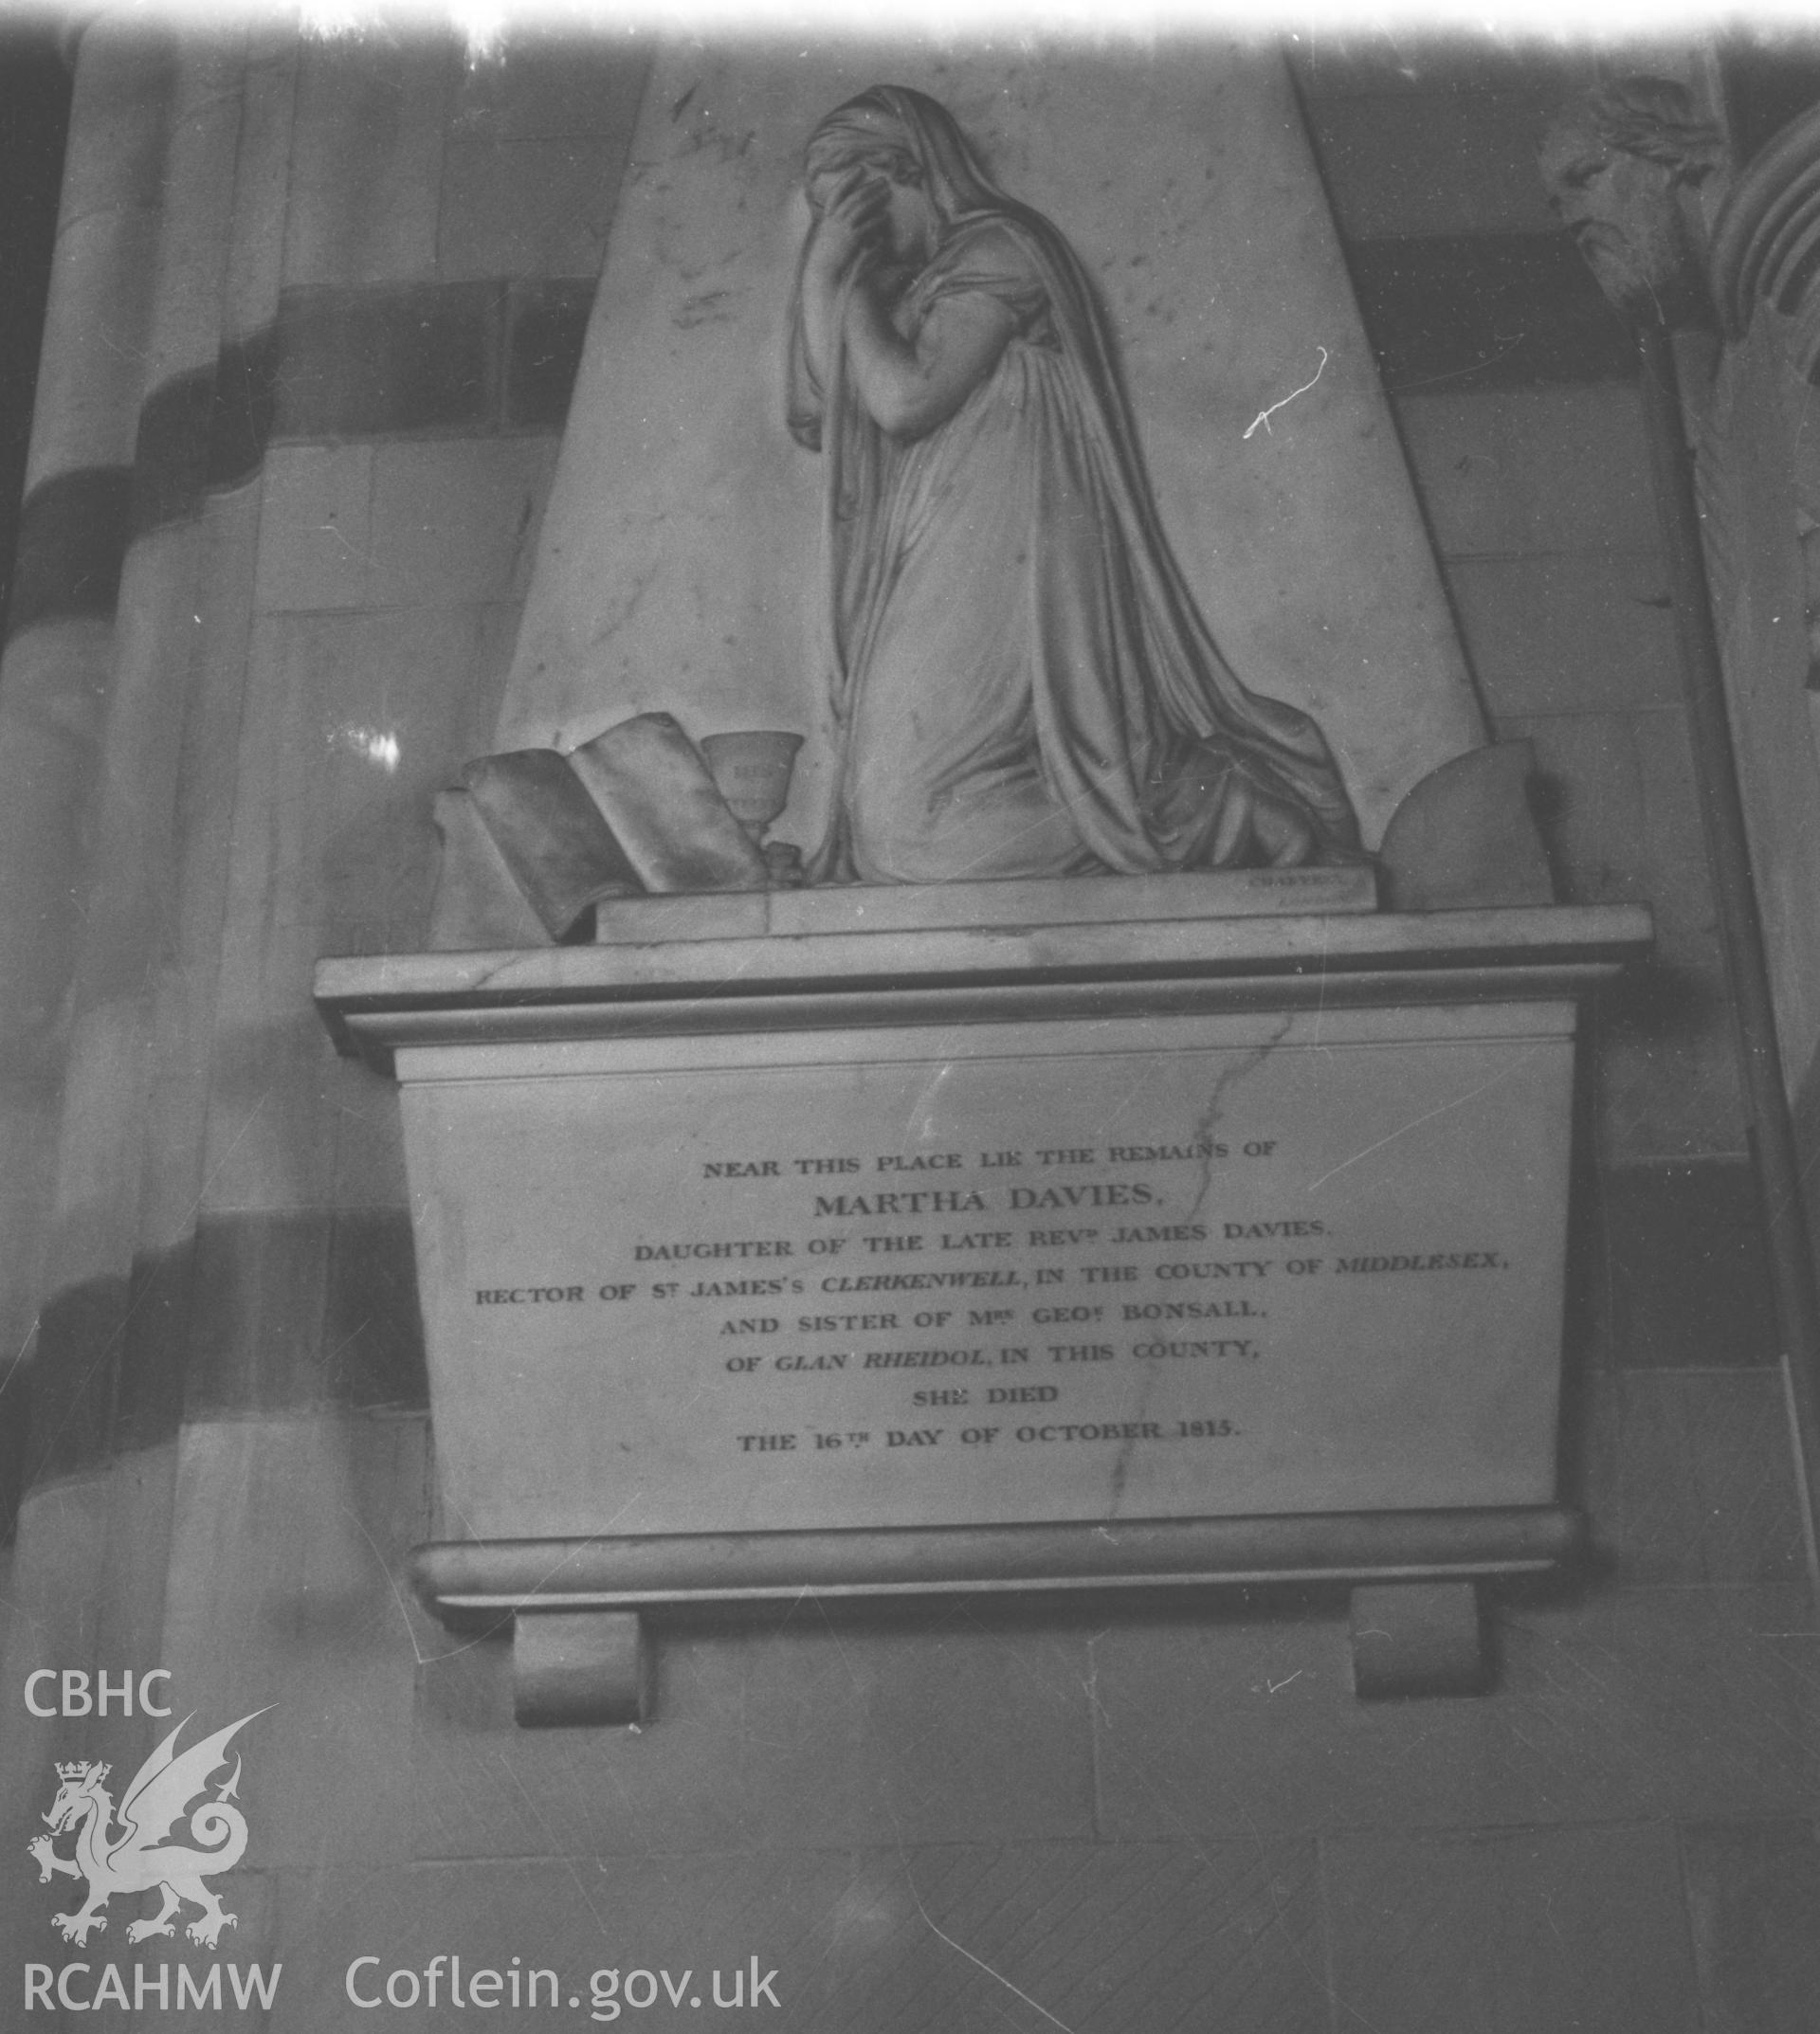 Digital copy of a black and white negative showing 1813 memorial to Martha Davies by chantrey at rear of north aisle of St. Michael's church, Aberystwyth. Photographed by Arthur O. Chater in August 1967.